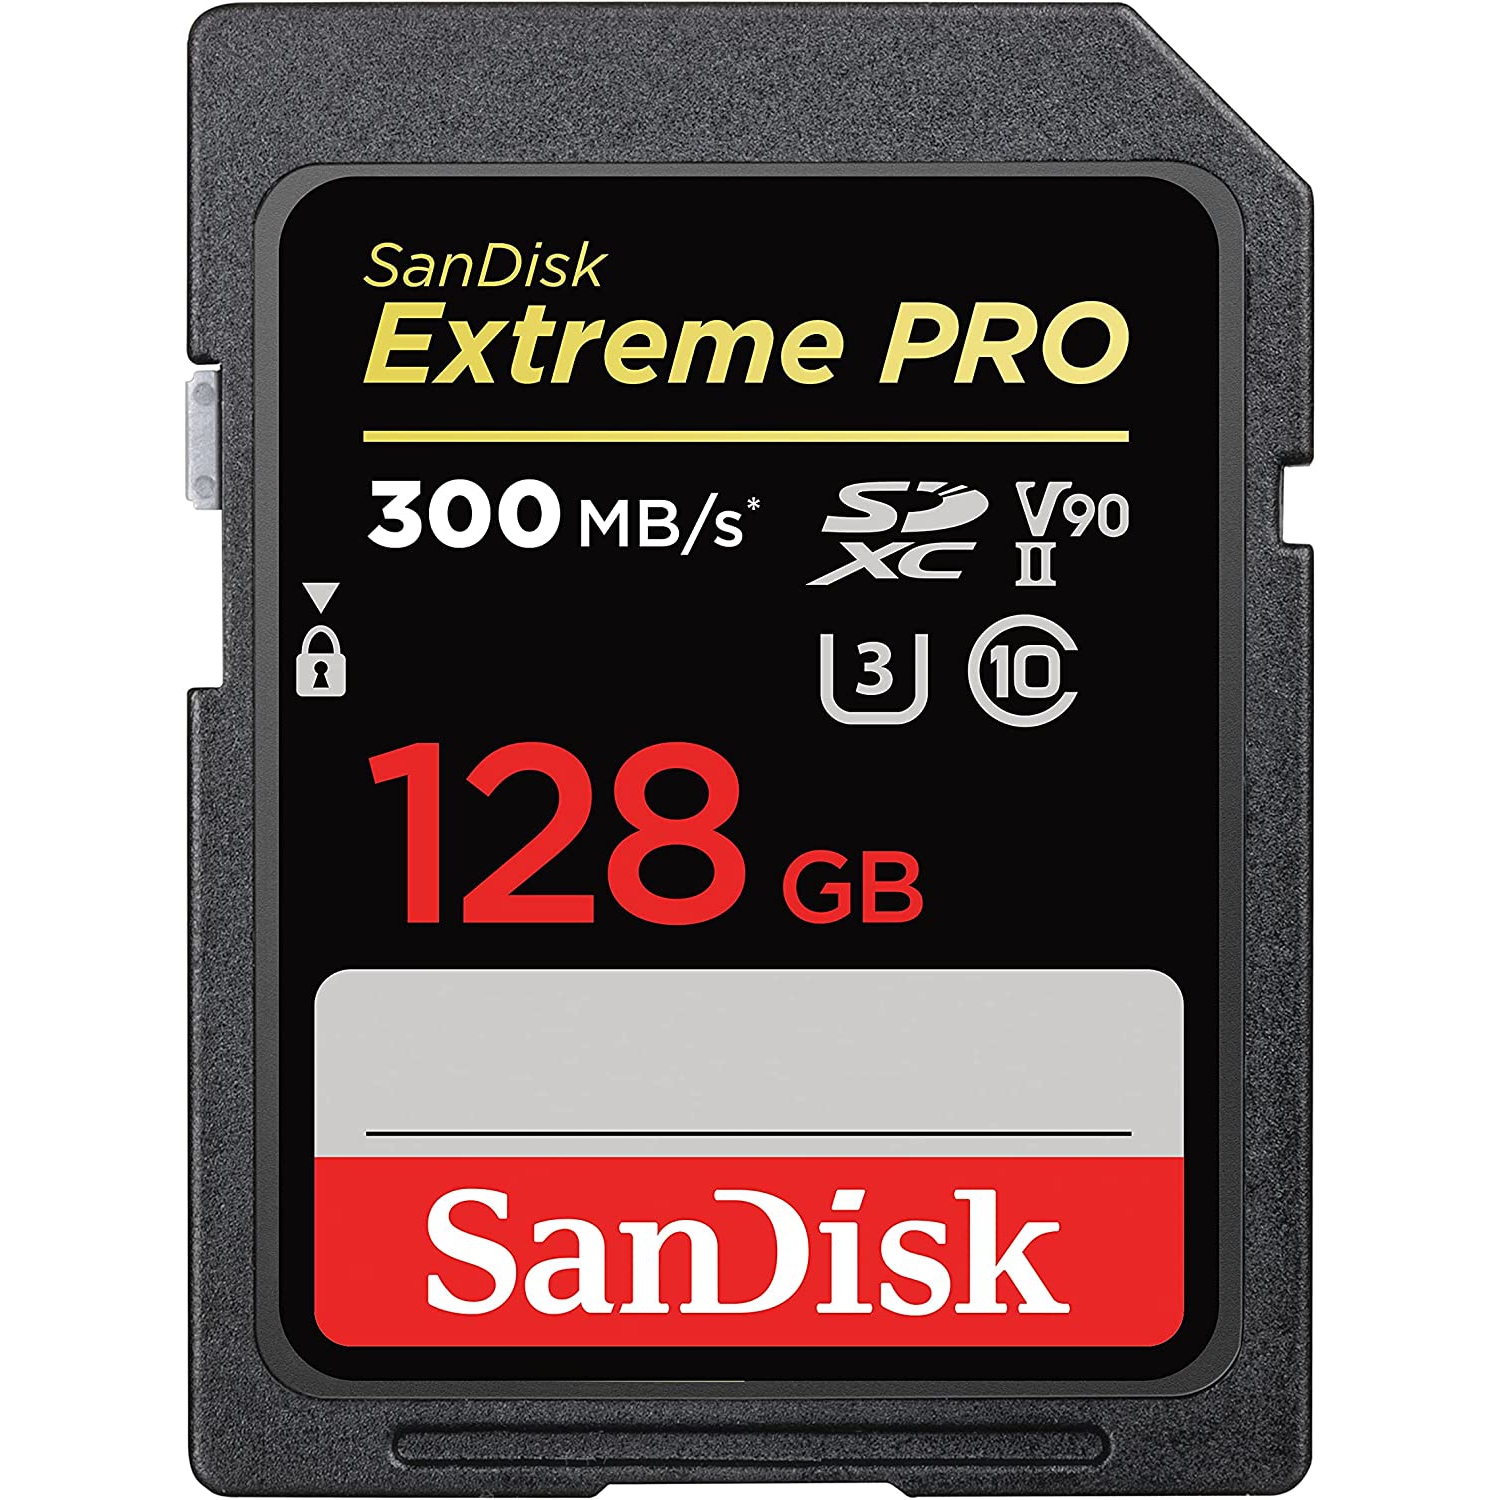 SanDisk 128GB Extreme Pro SDXC UHS-II Memory Card 300 MB/s - (SDSDXDK-128G-GN4IN)